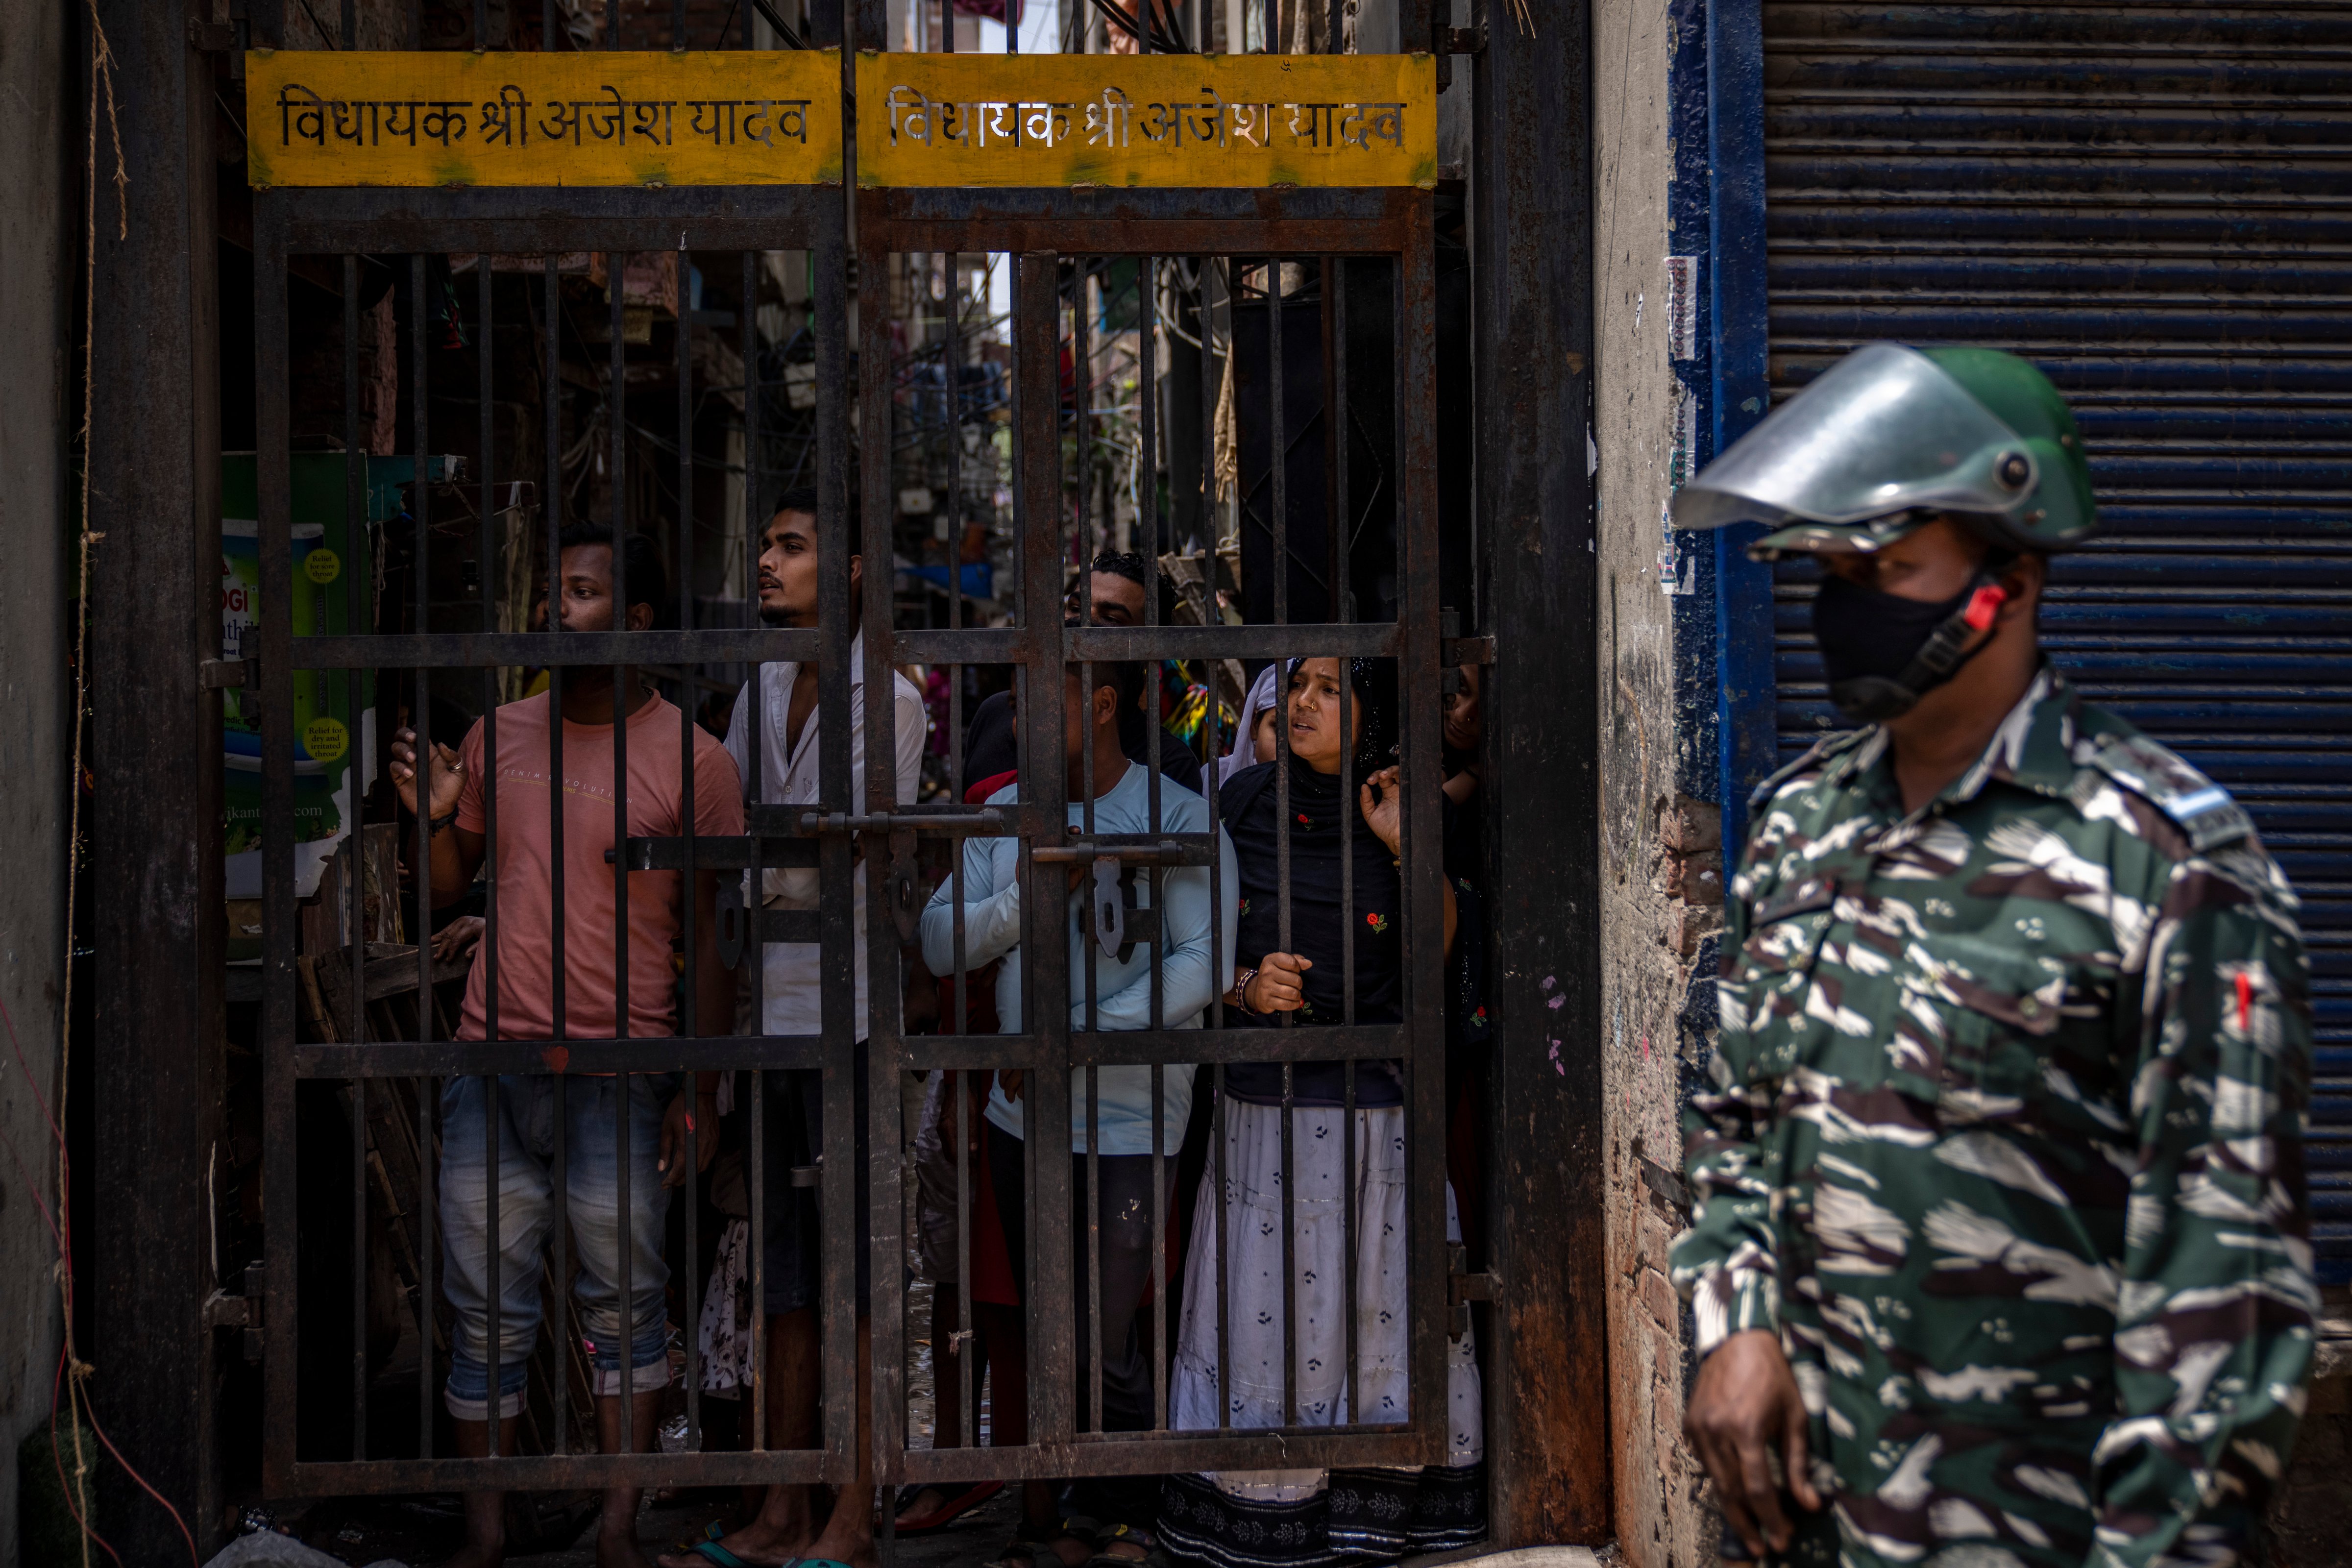 An Indian paramilitary solider stands guard as residents watch from behind a bolted iron gate during the demolition of Muslim-owned shops in New Delhi's northwest Jahangirpuri neighborhood on April 20, 2022. (Altaf Qadri—AP)